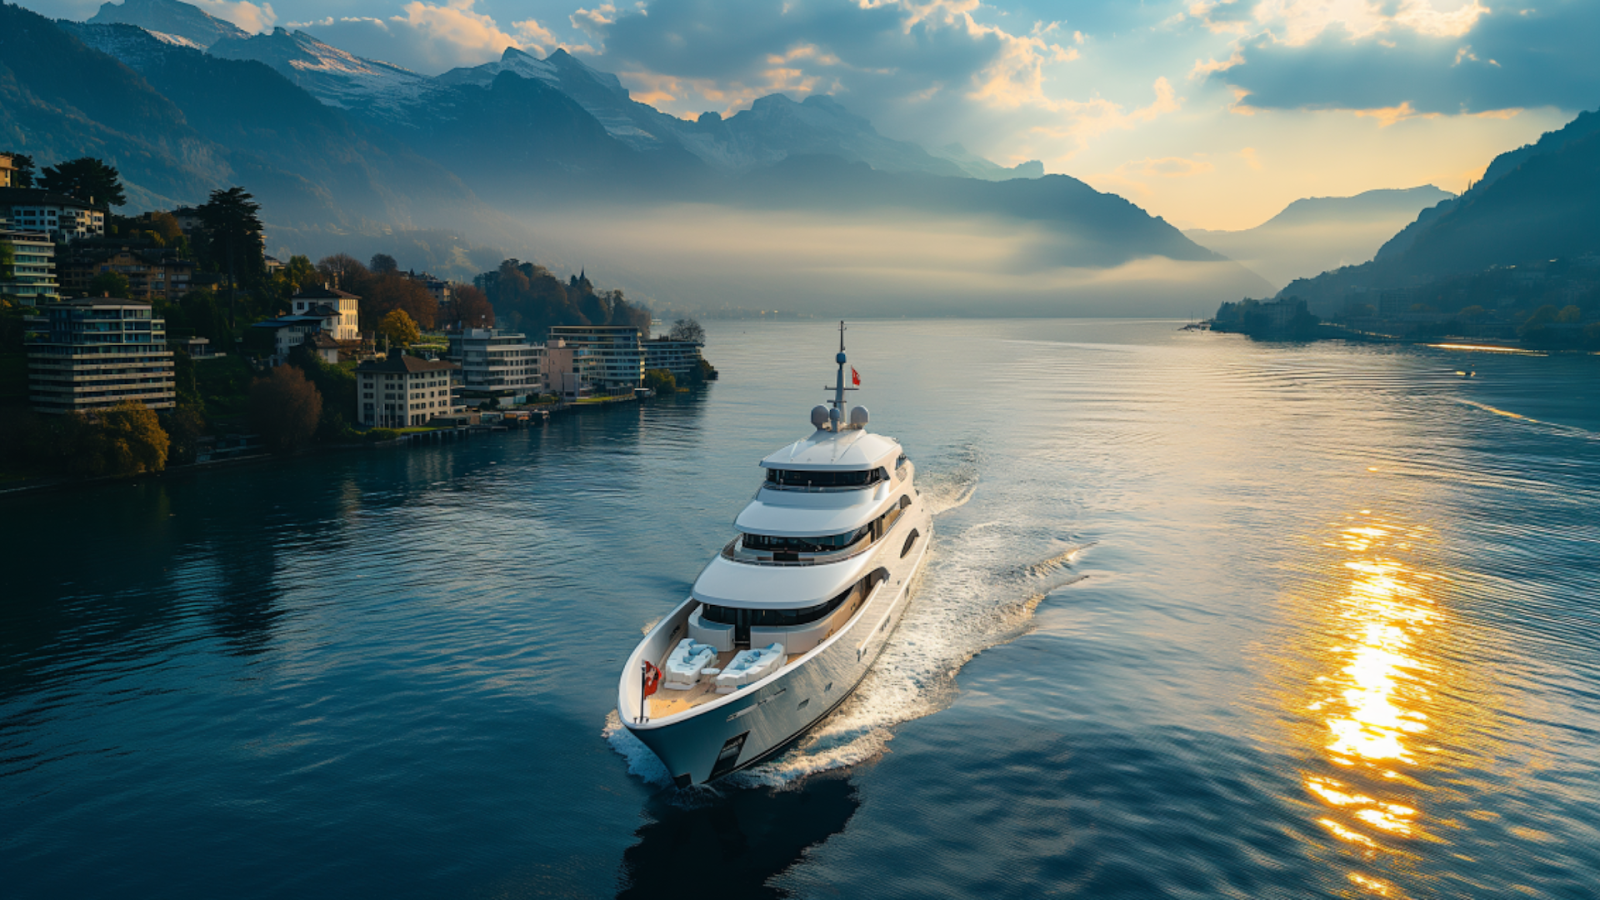 A luxury yacht on Lake Zurich with the majestic Swiss Alps looming in the background.